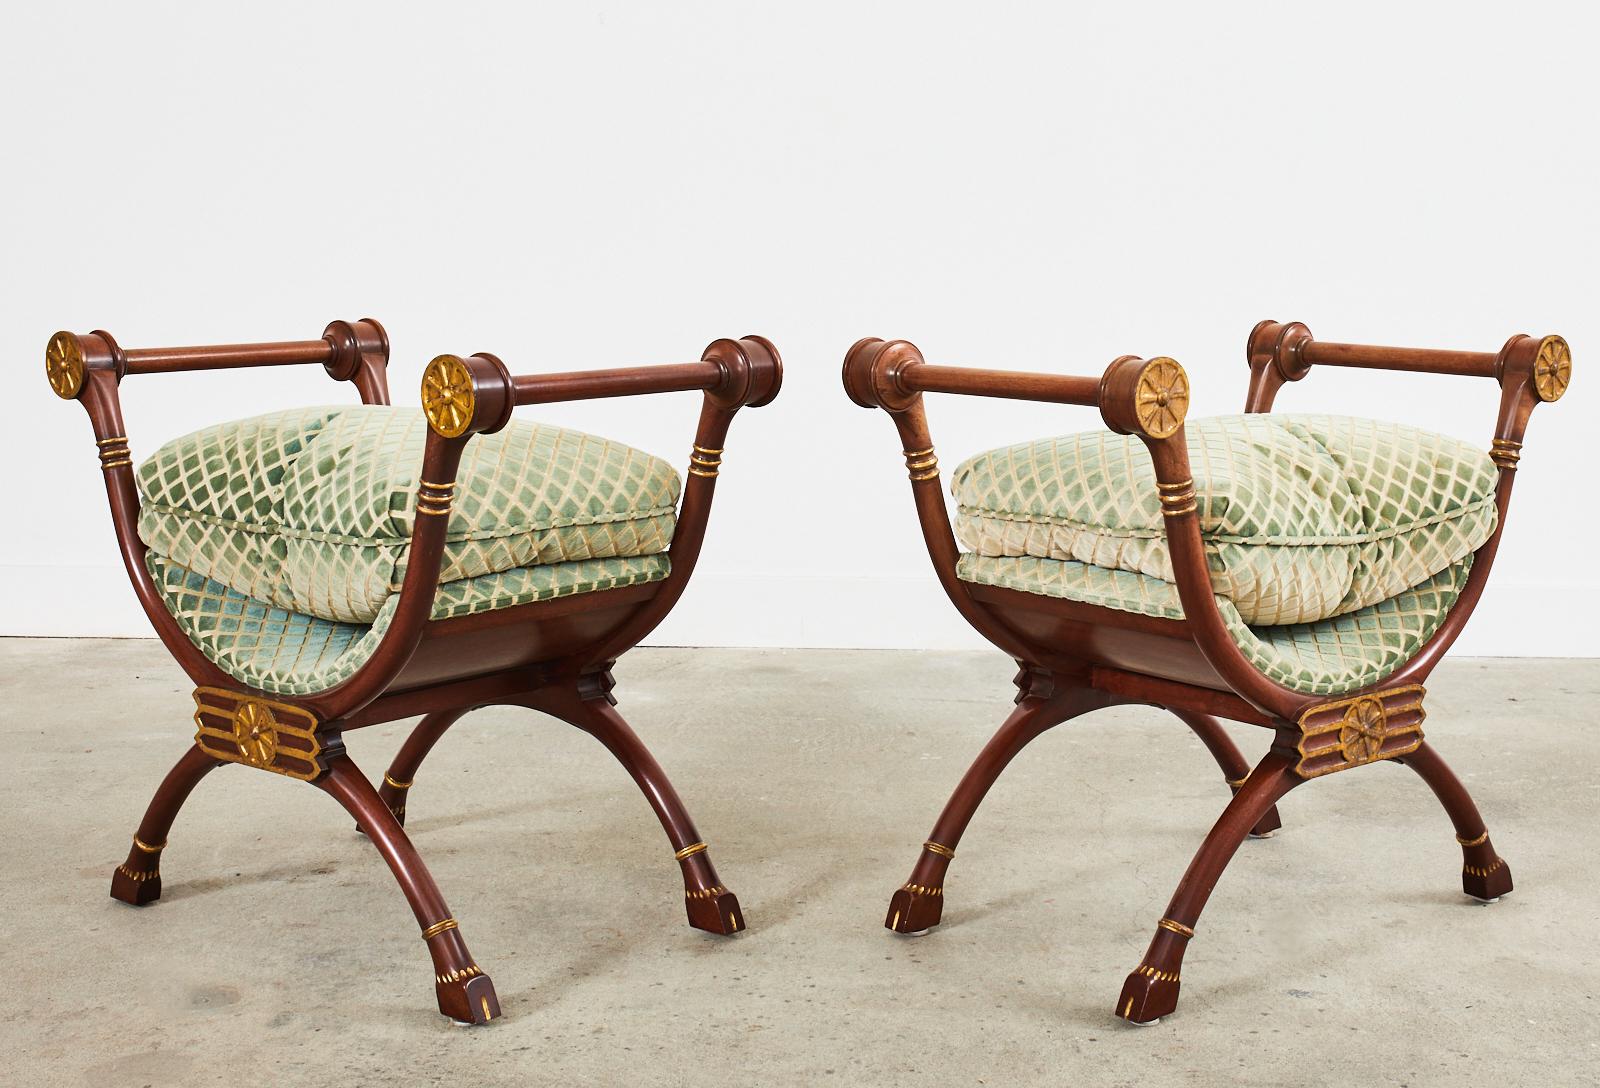 Hand-Crafted Pair of Neoclassical Style Savonarola Benches with Curule Legs